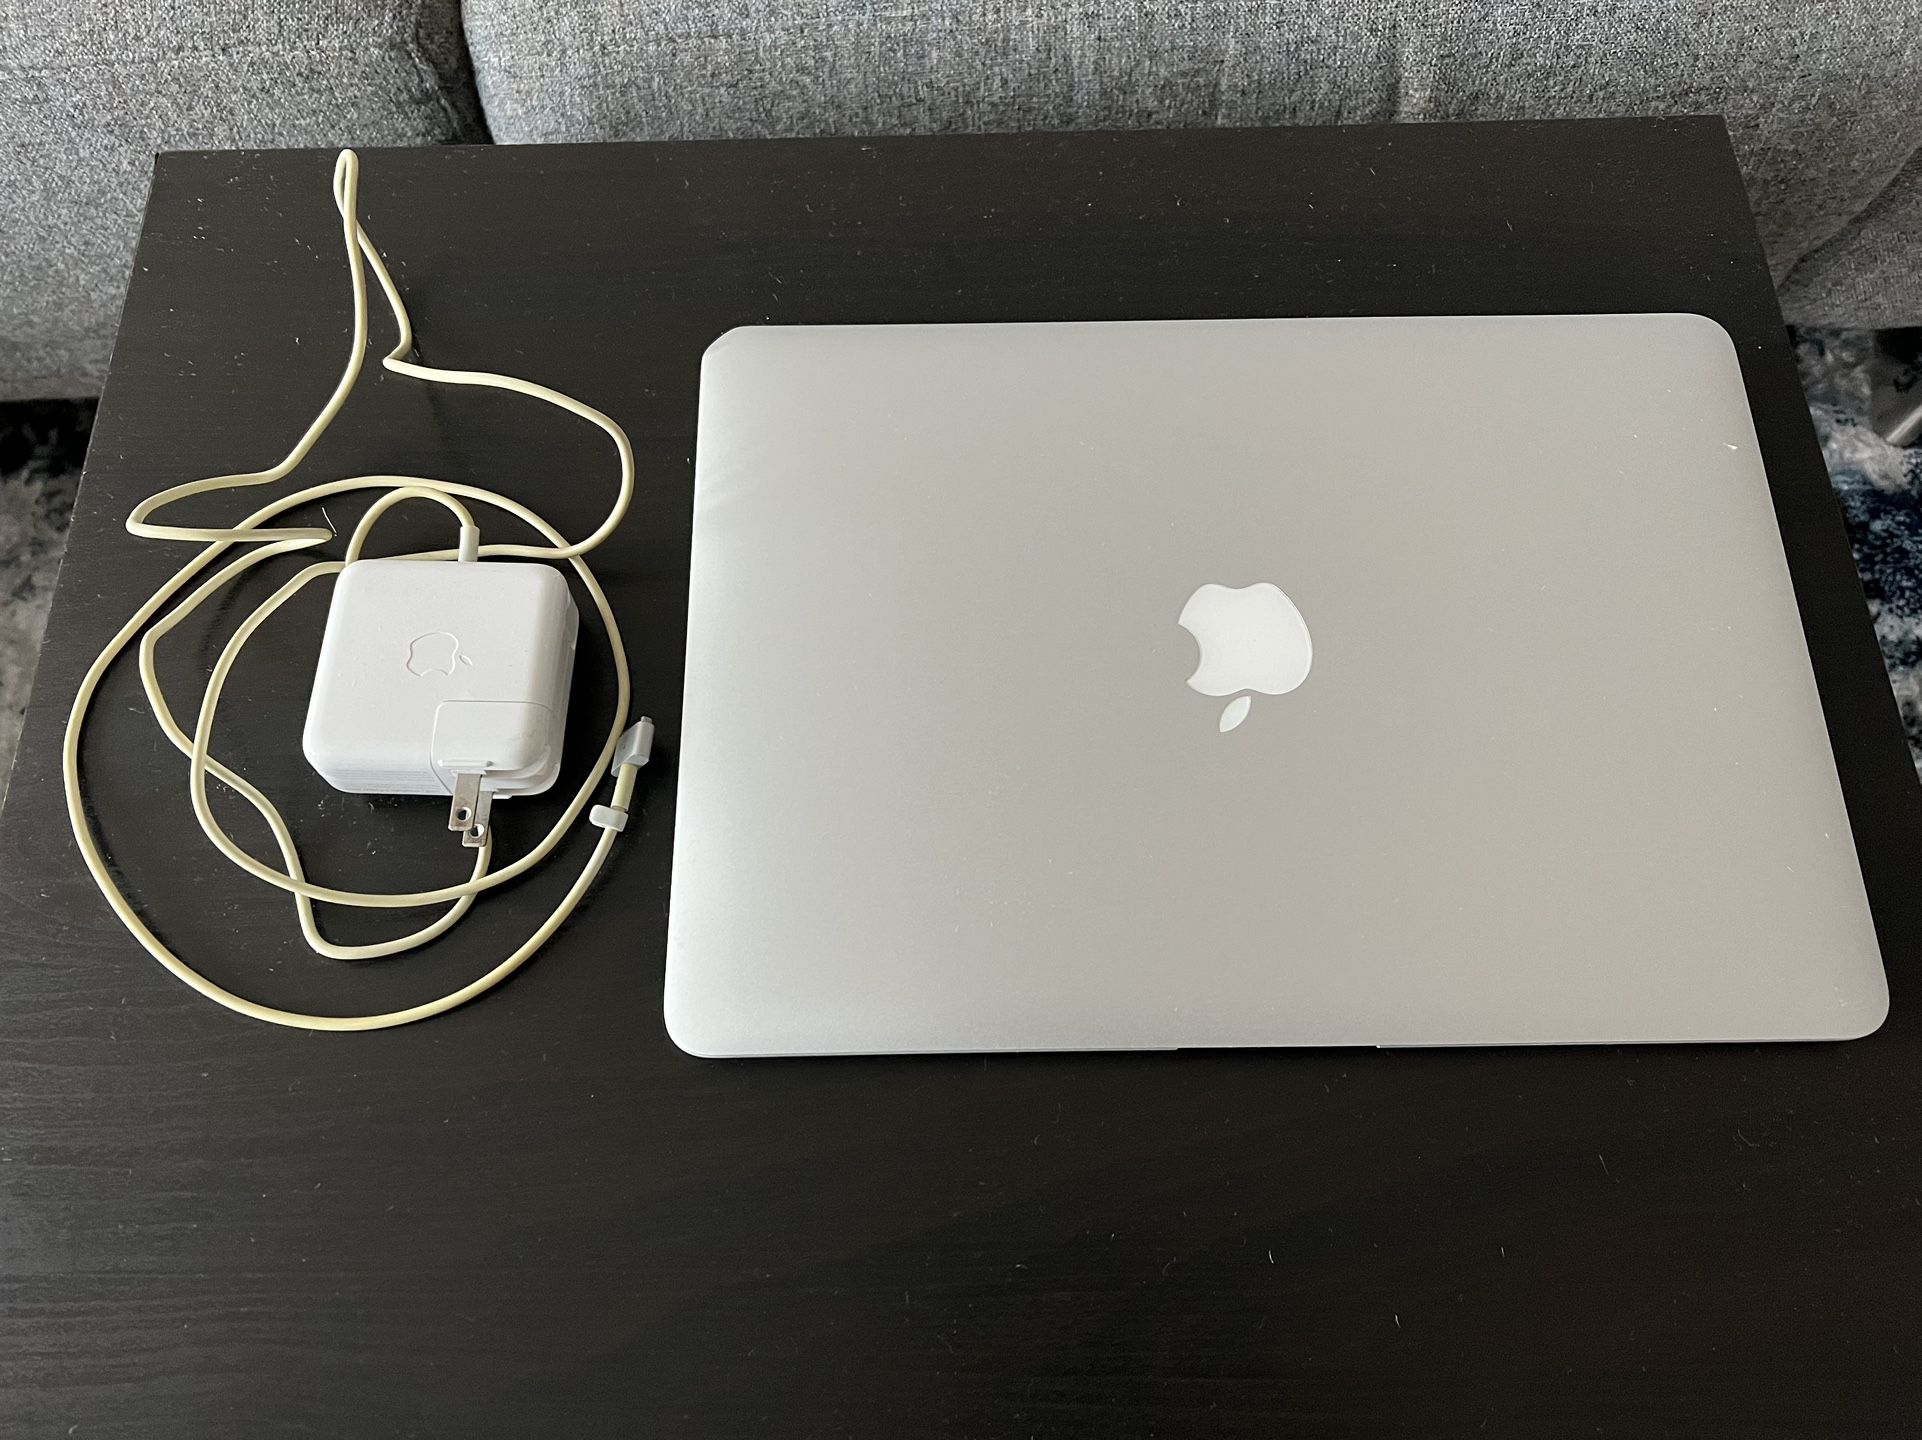 MacBook Air i5 1.6GHz 13" (Early 2015) 256GB SSD